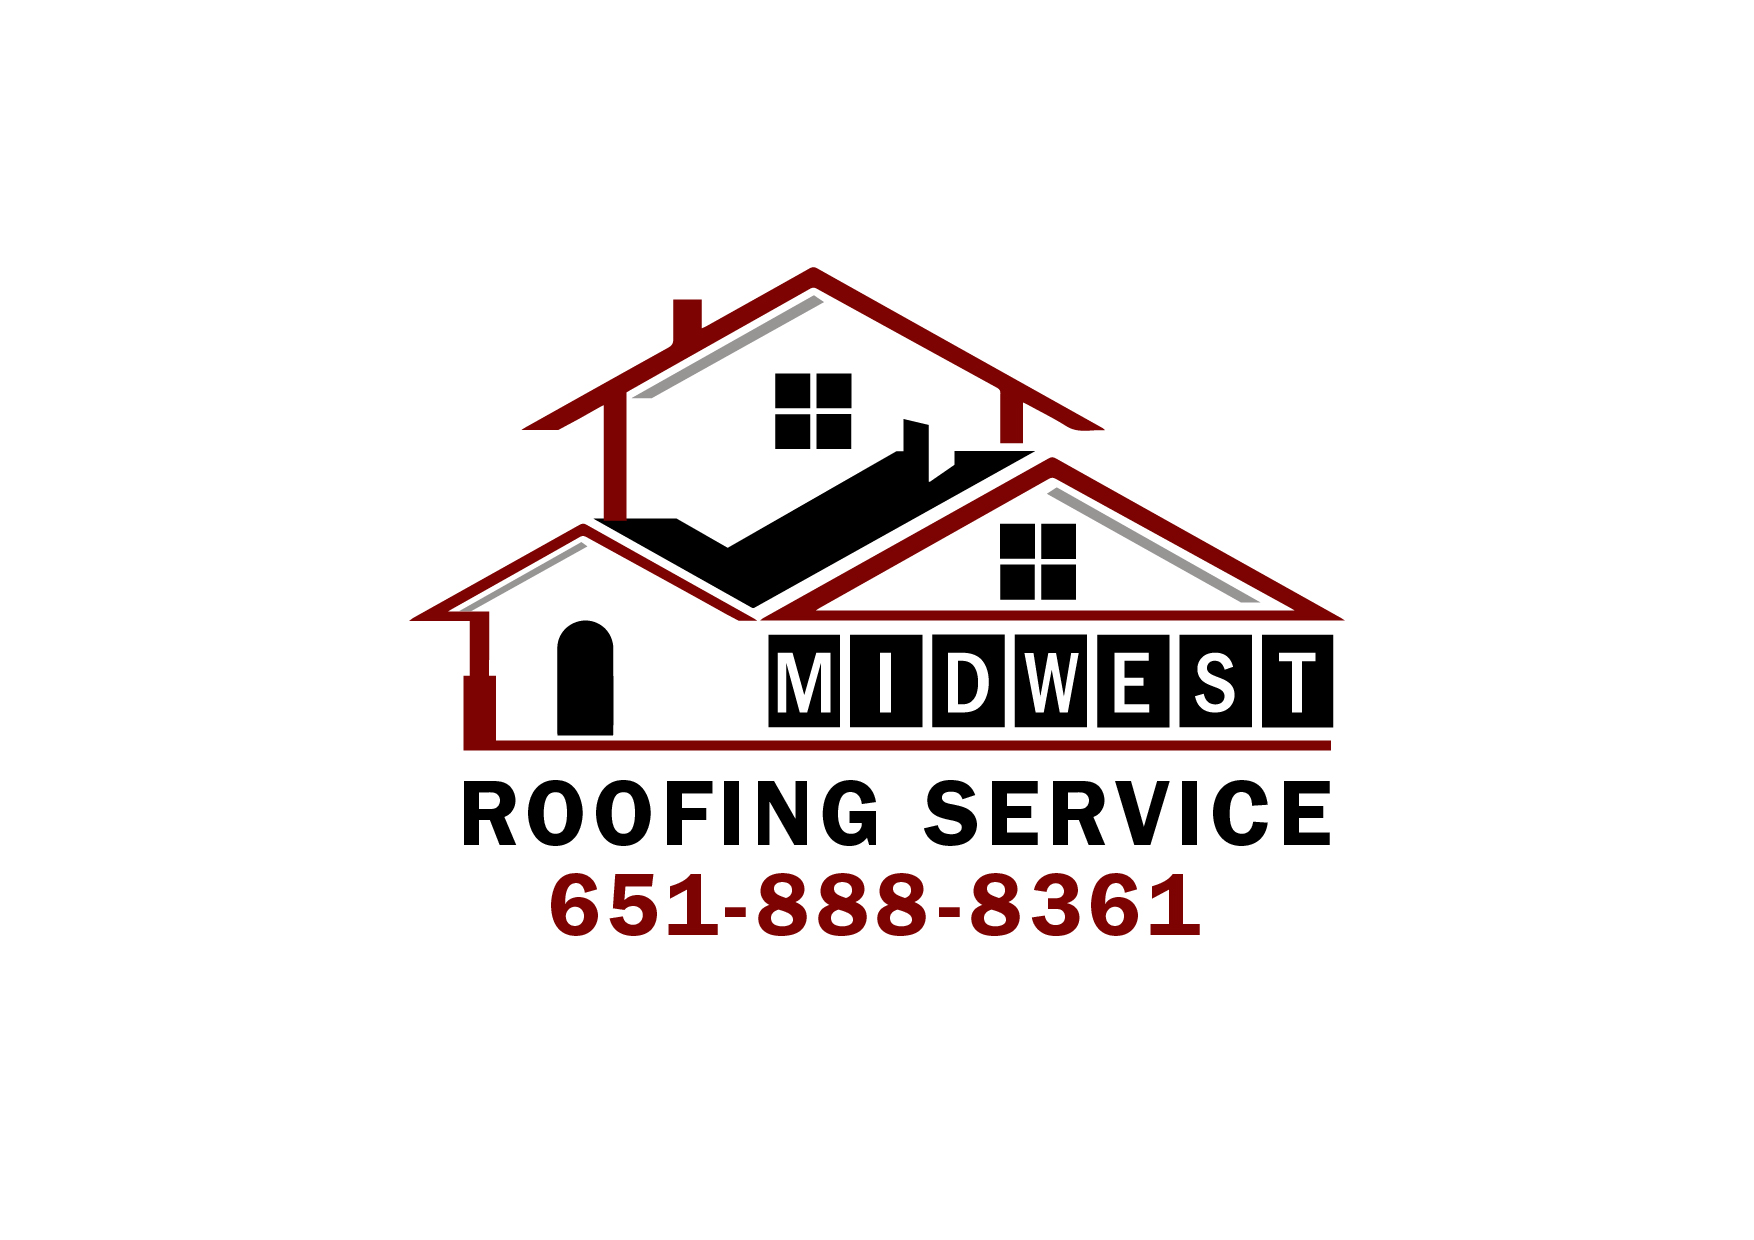 Midwest Roofing Service 487 Banfil St, St Paul, Minnesota 55102